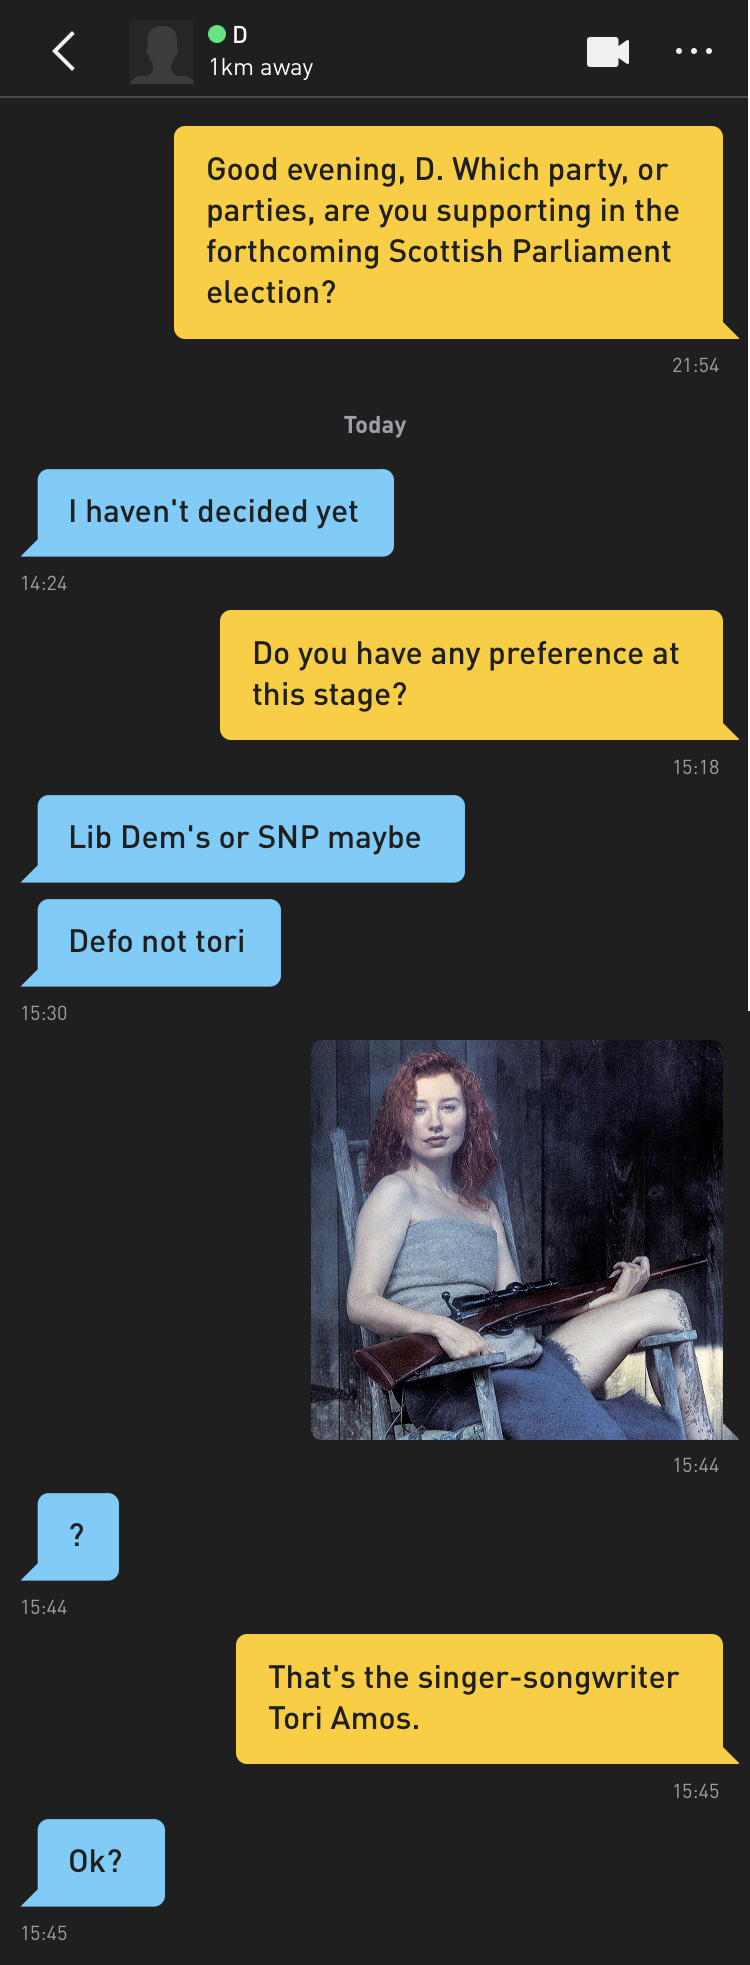 Me: Good evening, D. Which party, or parties, are you supporting in the forthcoming Scottish Parliament election? D: I haven't decided yet. Me: Do you have any preference at this stage? D: Lib Dem's or SNP maybe D: Defo not tori Me: [photo of Tori Amos holding a shotgun] D: ? Me: That's the singer-songwriter Tori Amos. D: Ok?